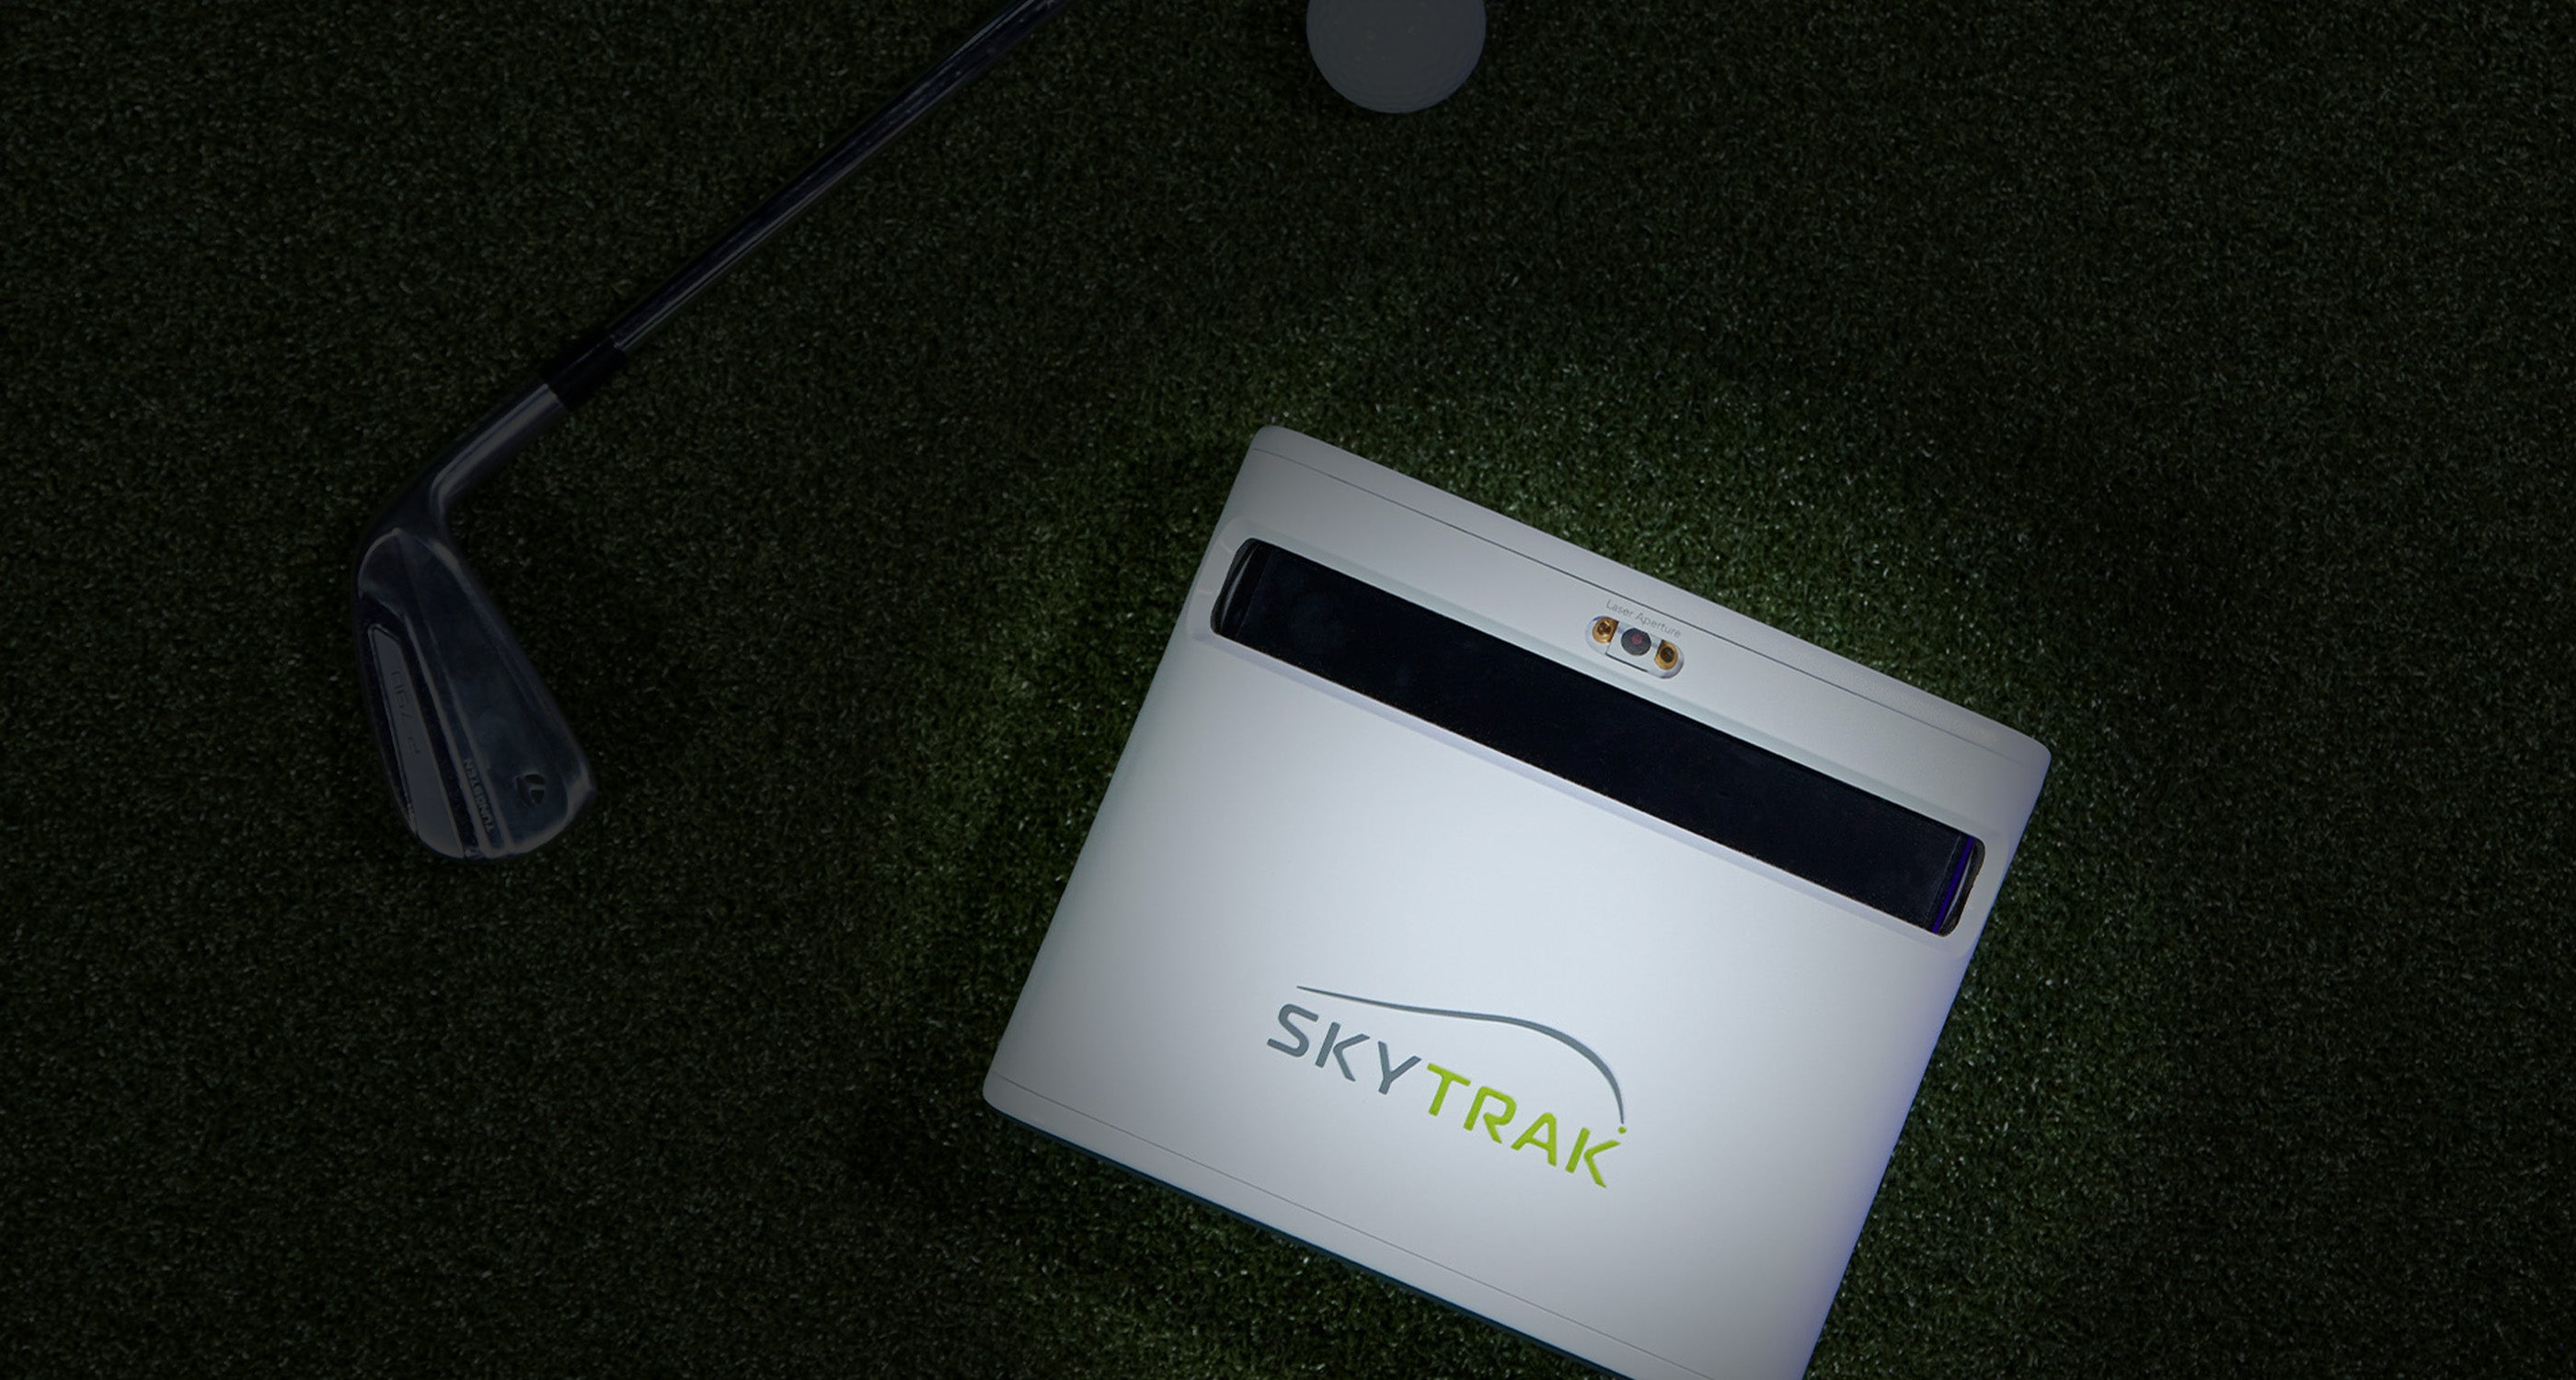 SKYTRAK plus launch monitor for golf simulation at home